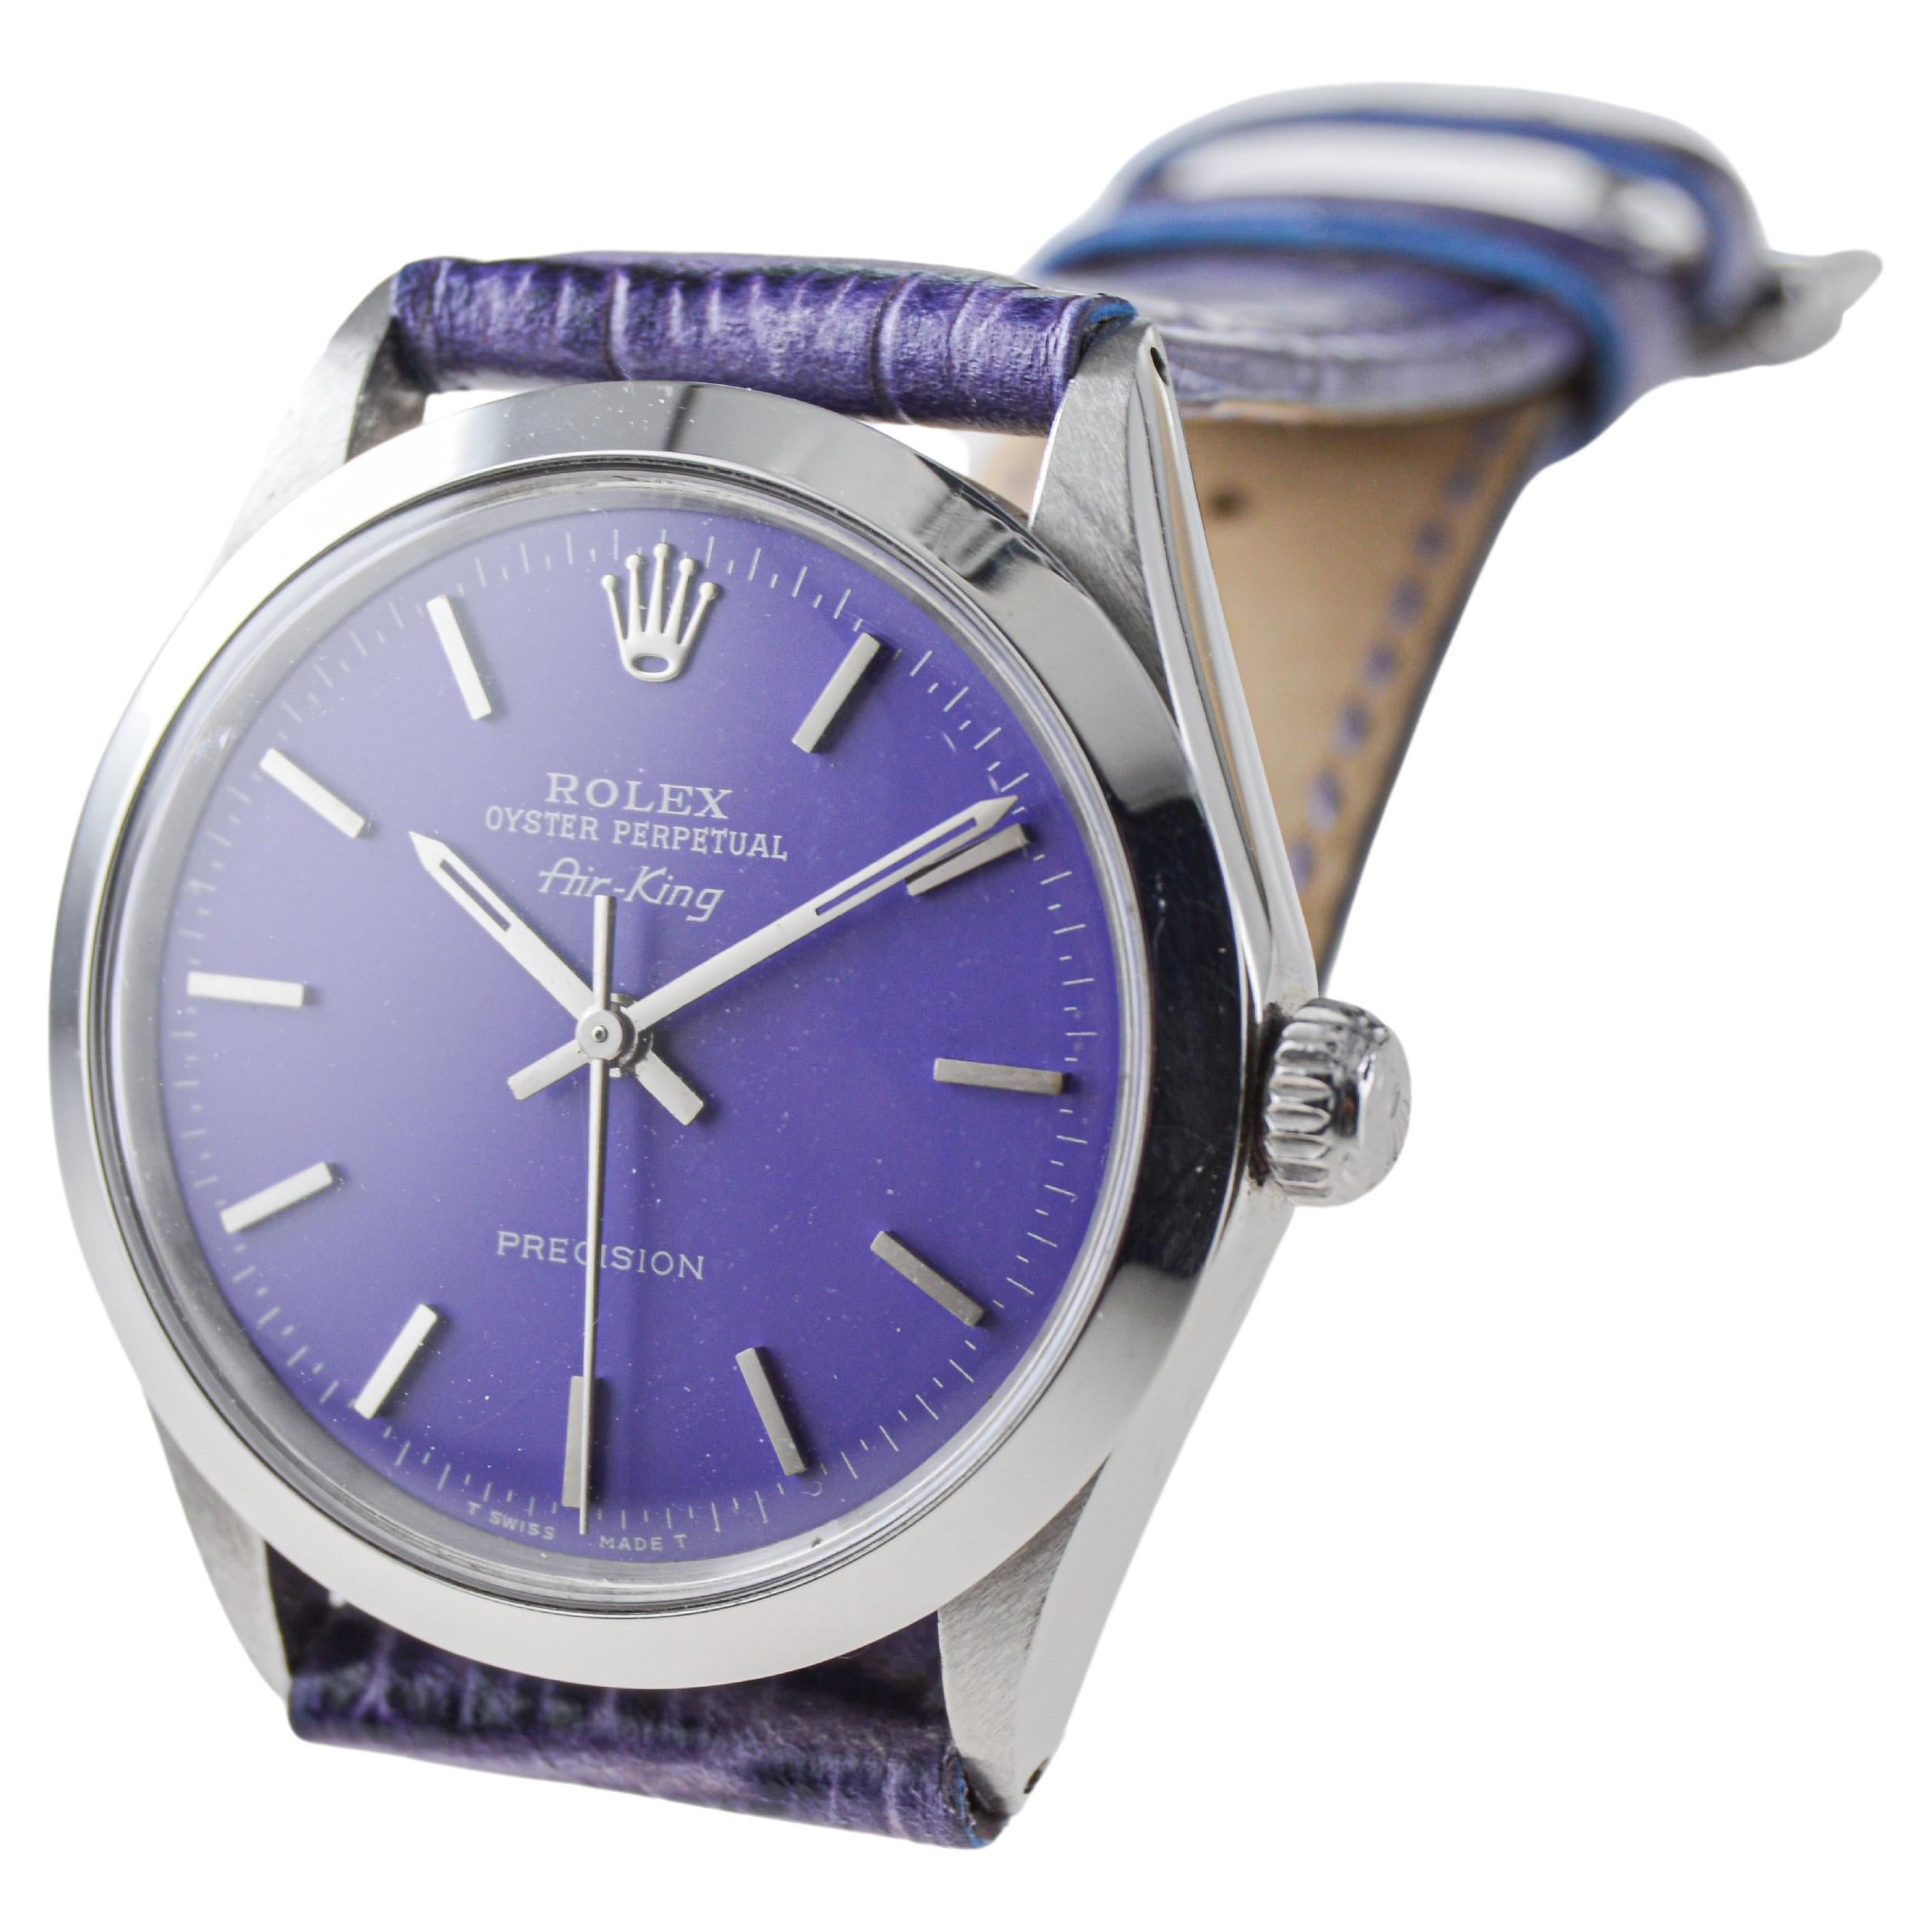 Rolex Stainless Steel Air King With Custom Purple Dial circa, 1960's For Sale 4